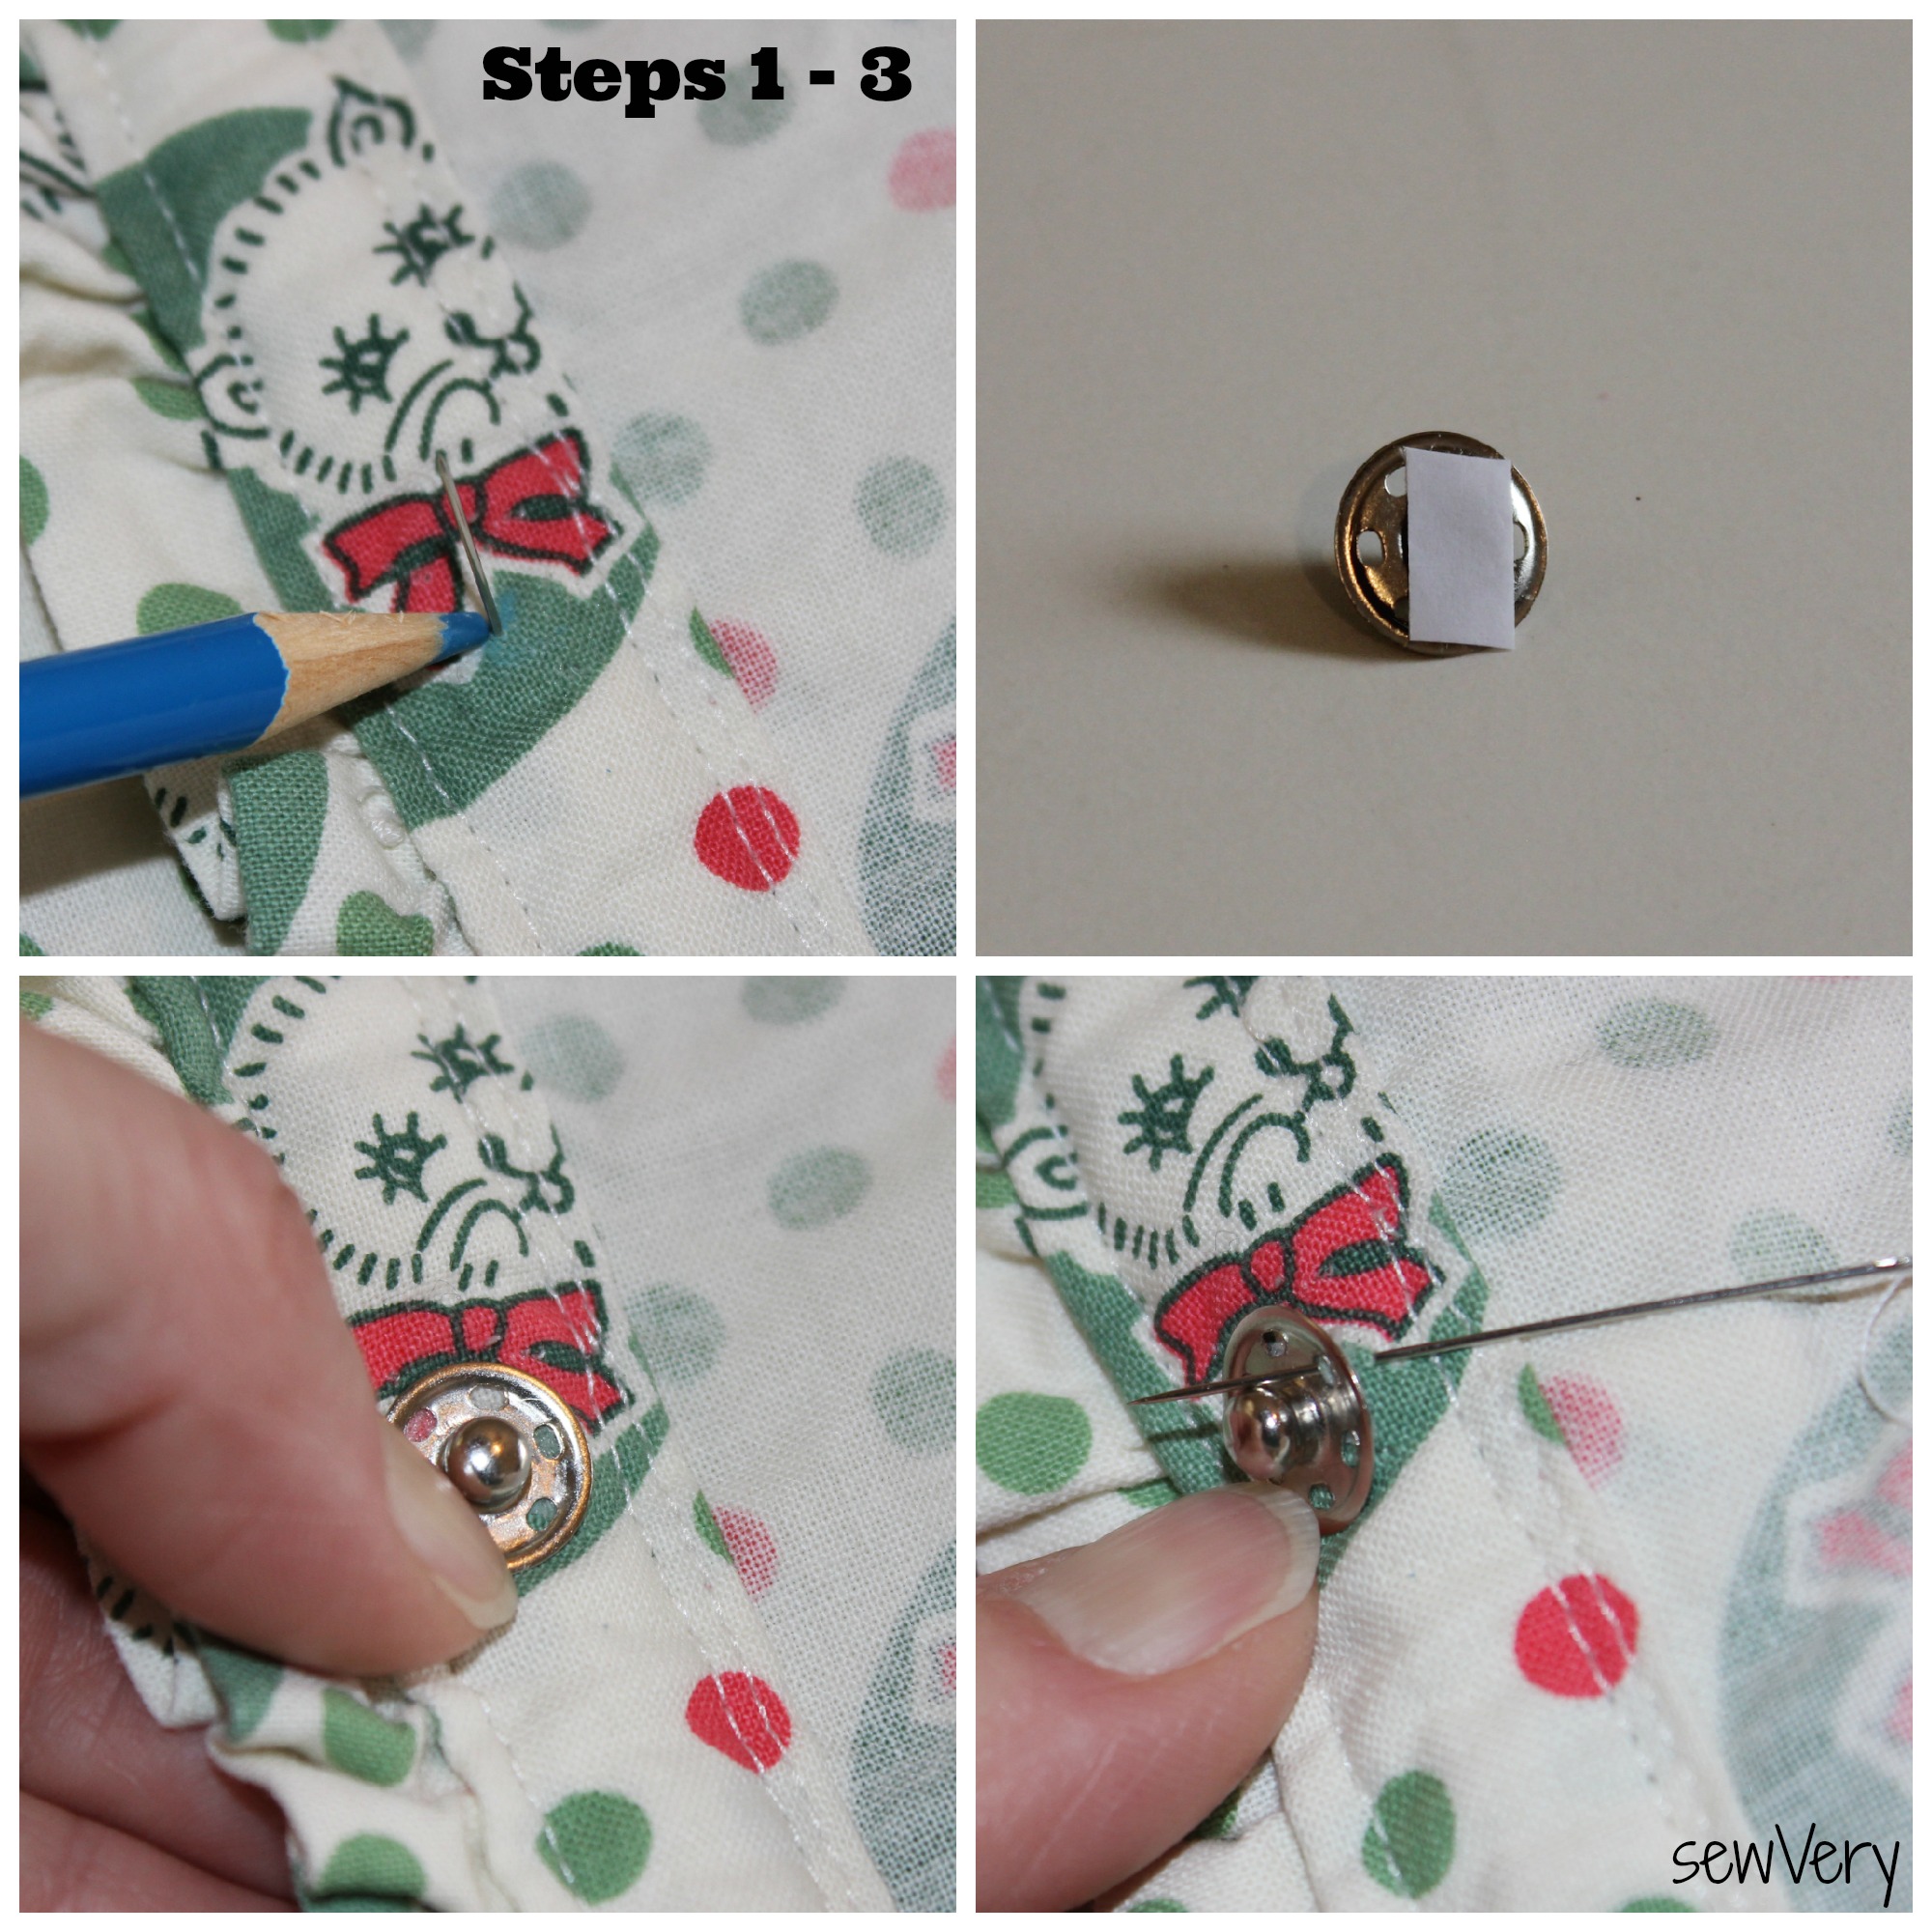 Steps 1 - 3 of Sewing on Snaps